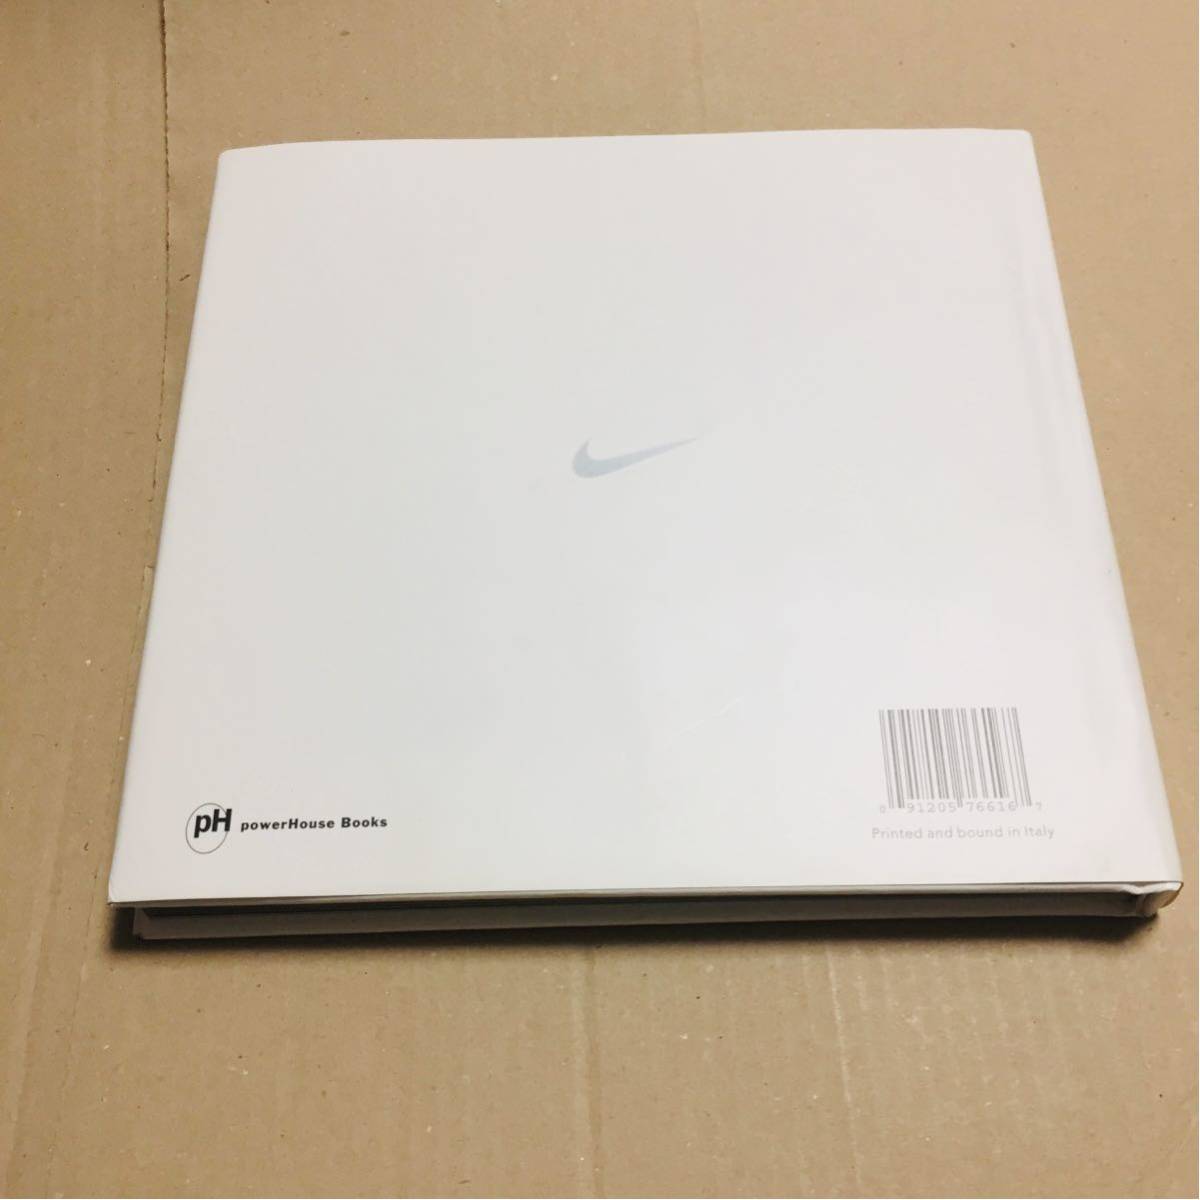  foreign book photoalbum Sole Provider: 30 Years of Nike Basketball Nike basketball shoes bashu sneakers 